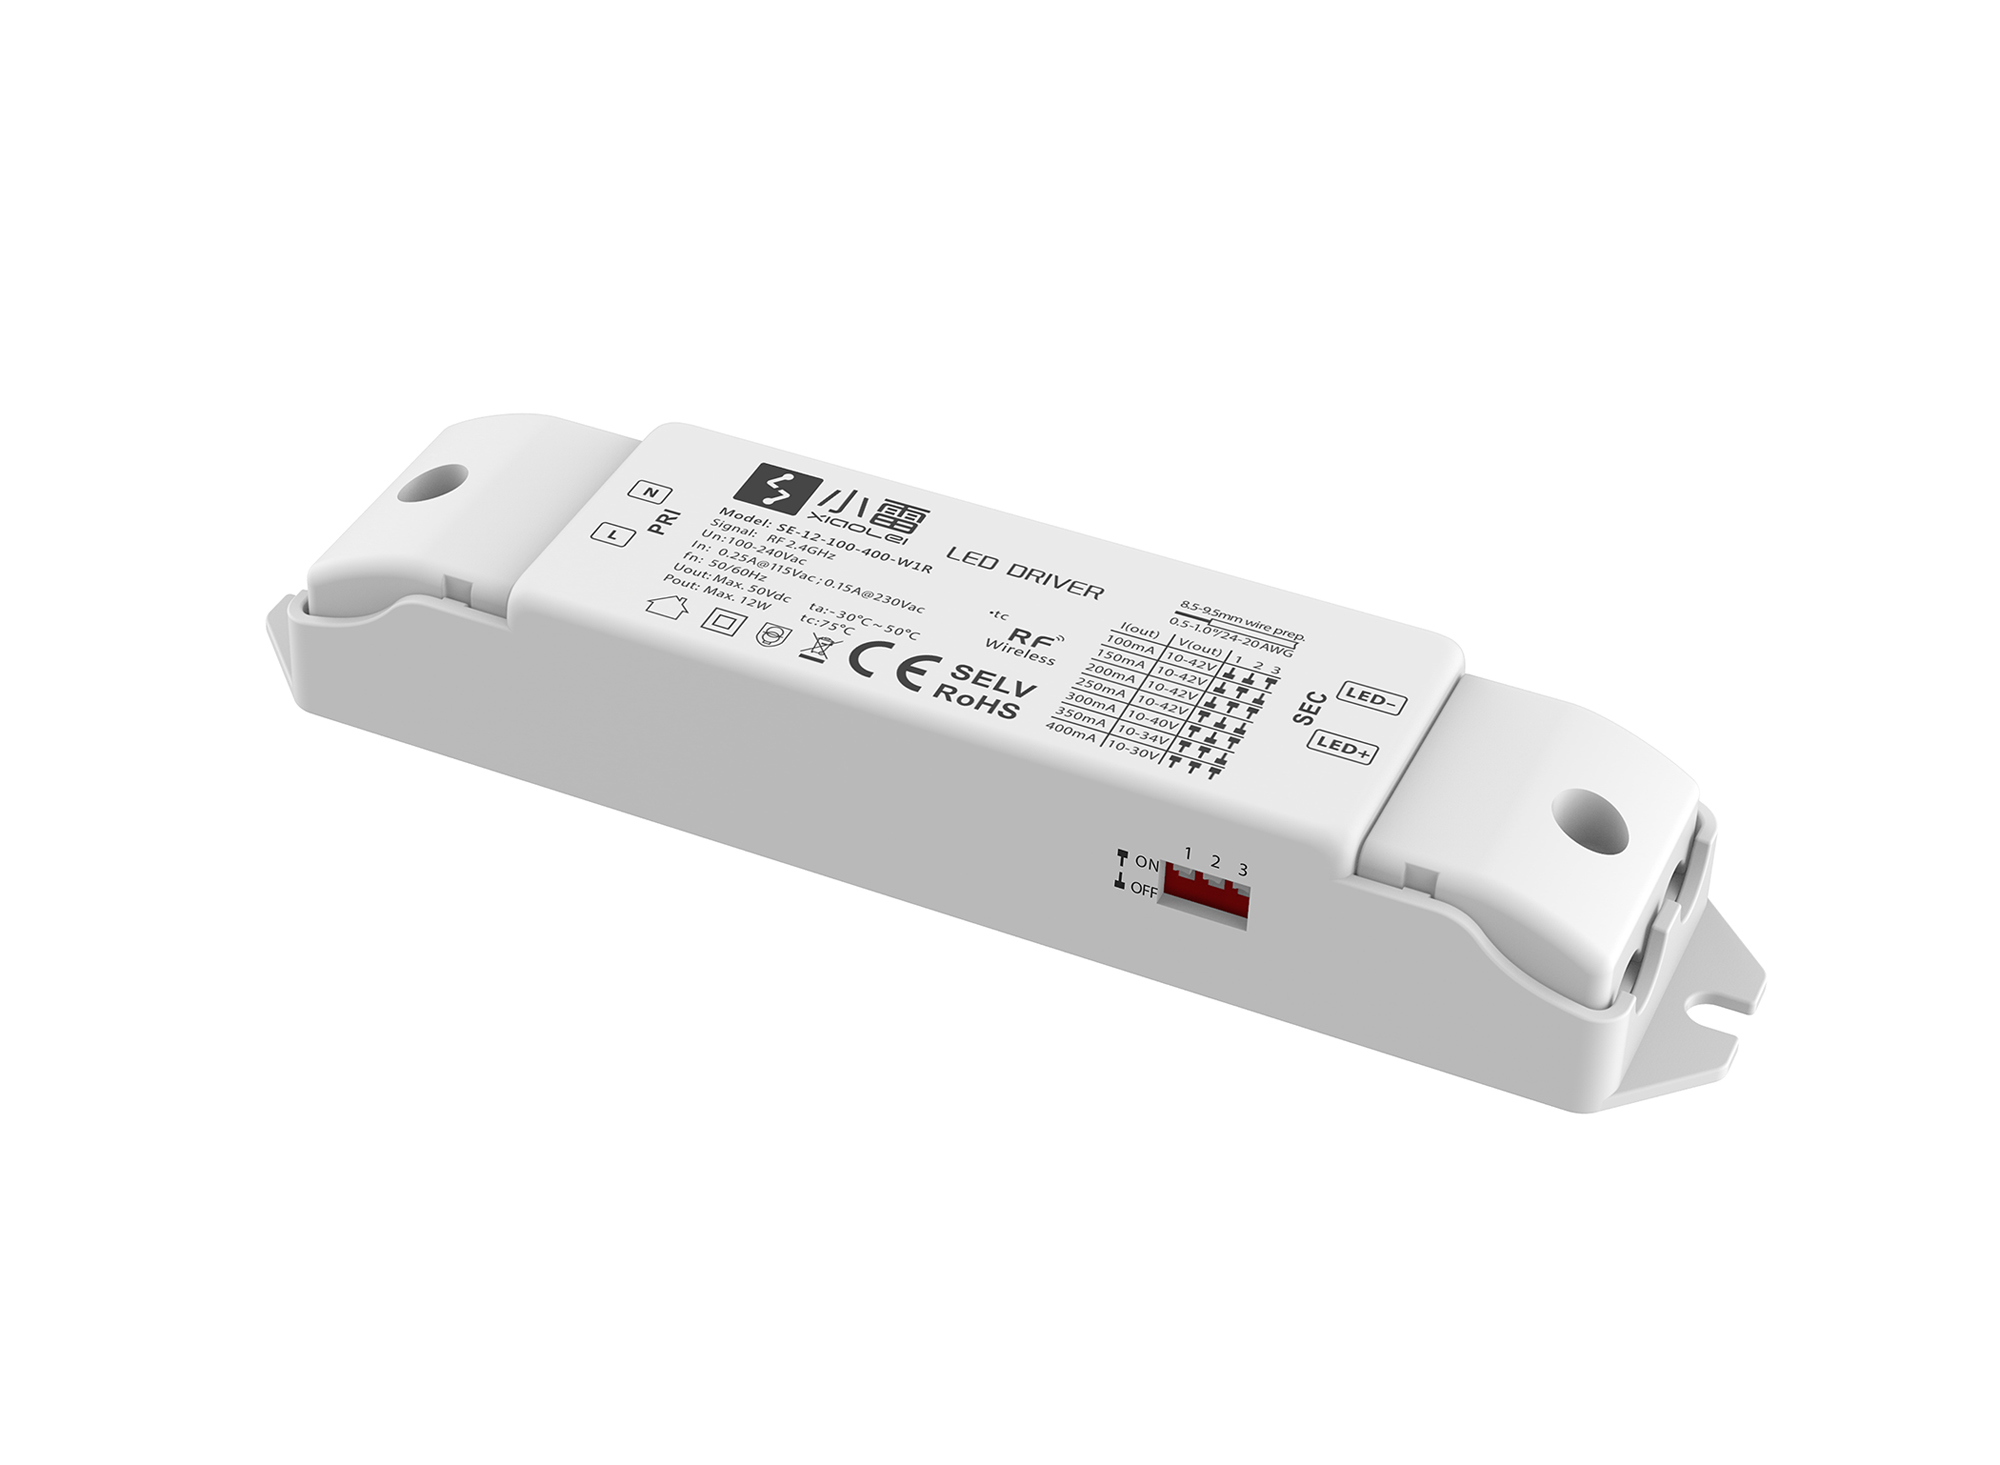 SE-12-100-400-W1R  Ltech Smart home Wireless Dimmablre LED Driver 1-12W 10-42Vdc/350-700mA. 0-100% PWM dimming; Over voltage; over load; Over heat and Short circuit protection; IP20.